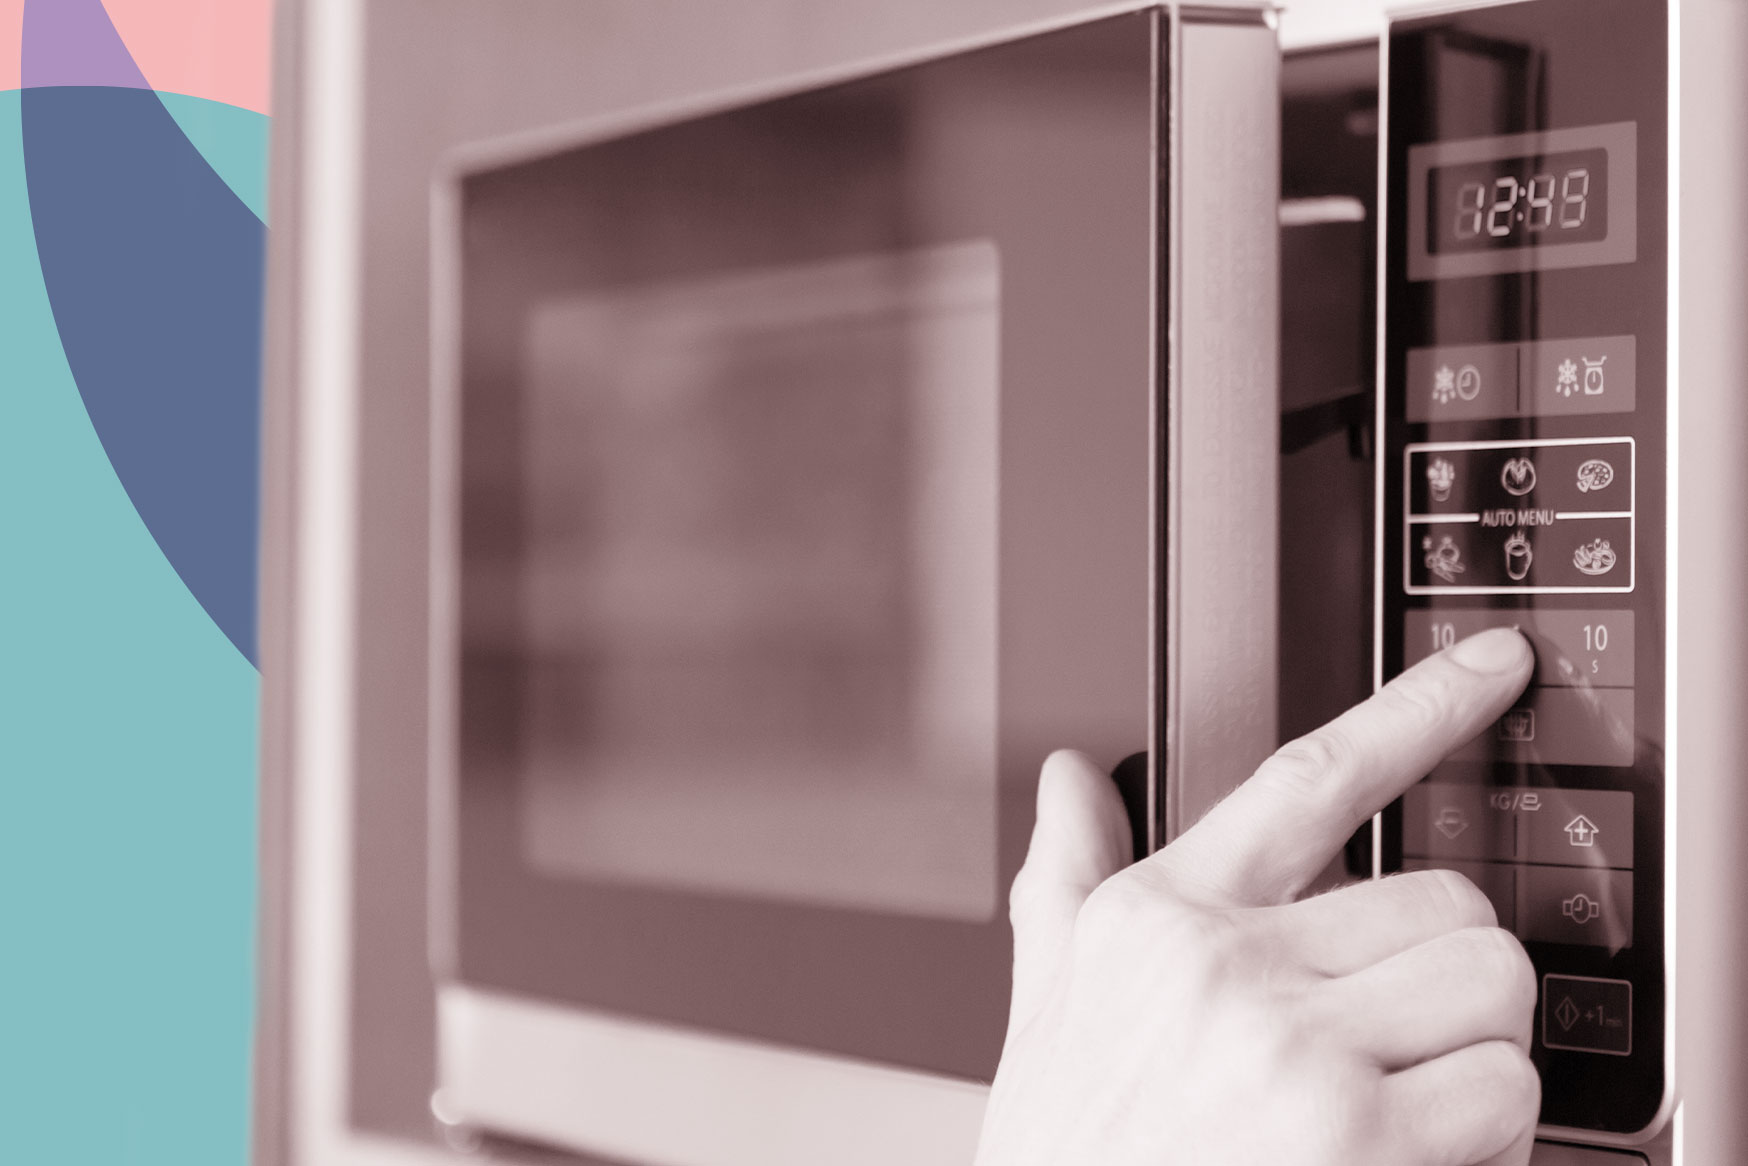 How to get more lemon juice, and 8 other genius microwave hacks